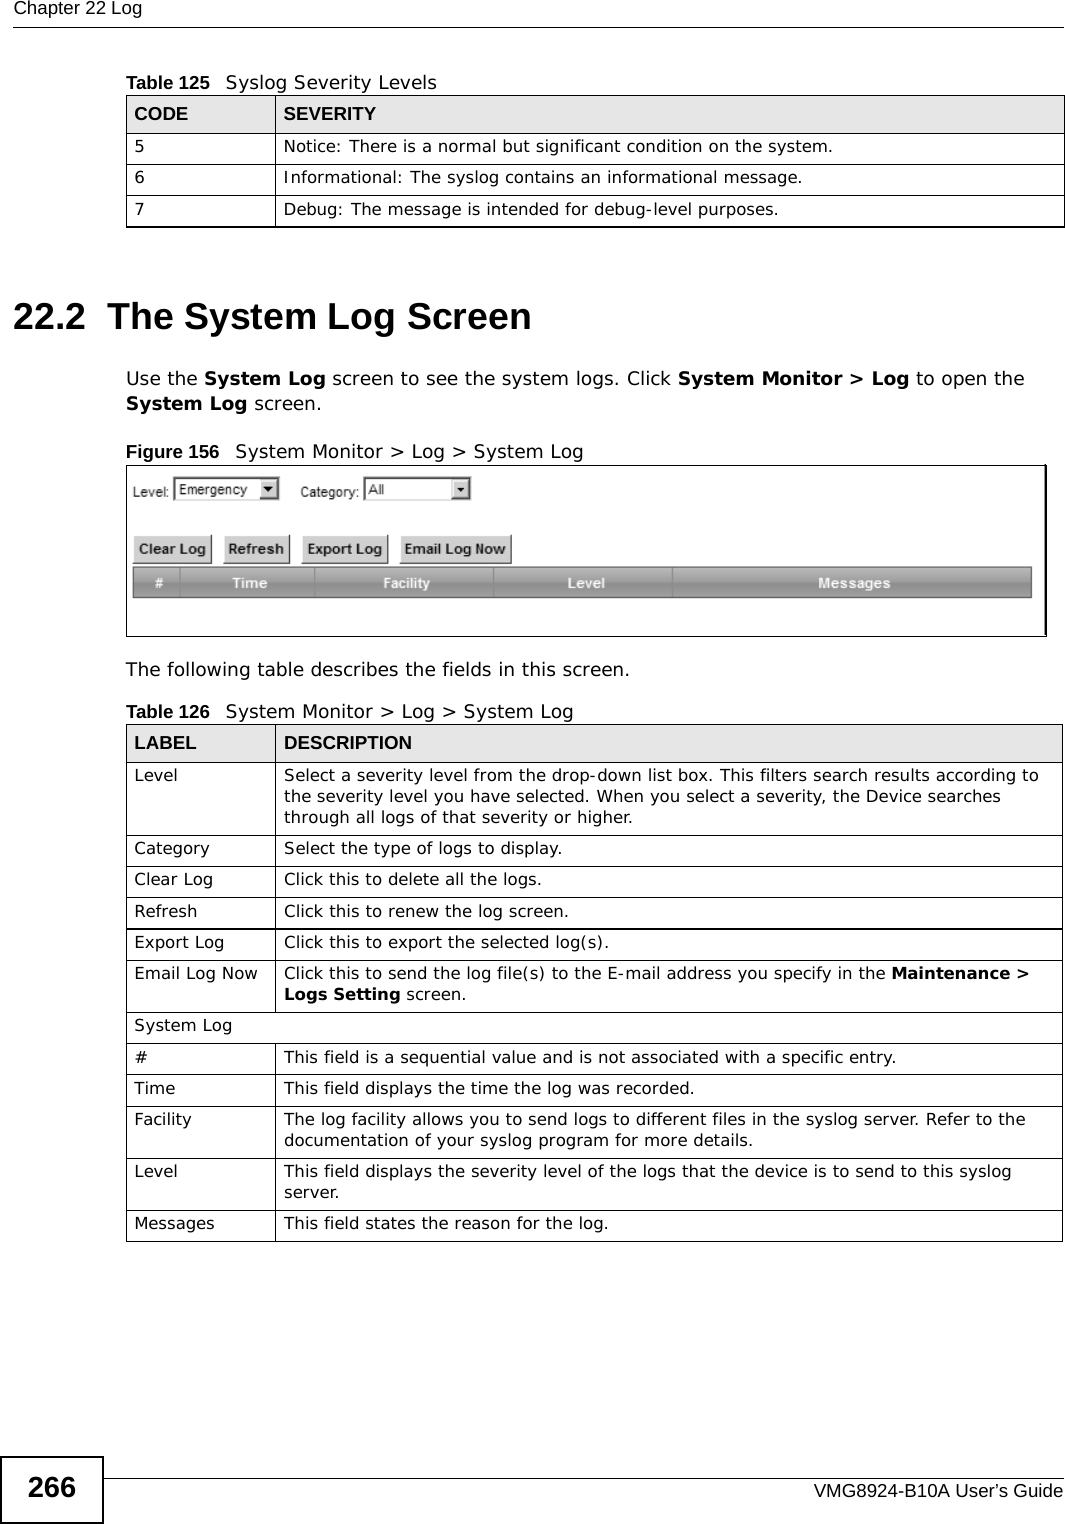 Chapter 22 LogVMG8924-B10A User’s Guide26622.2  The System Log Screen Use the System Log screen to see the system logs. Click System Monitor &gt; Log to open the System Log screen. Figure 156   System Monitor &gt; Log &gt; System LogThe following table describes the fields in this screen.   5 Notice: There is a normal but significant condition on the system.6 Informational: The syslog contains an informational message.7 Debug: The message is intended for debug-level purposes.Table 125   Syslog Severity LevelsCODE SEVERITYTable 126   System Monitor &gt; Log &gt; System LogLABEL DESCRIPTIONLevel Select a severity level from the drop-down list box. This filters search results according to the severity level you have selected. When you select a severity, the Device searches through all logs of that severity or higher. Category Select the type of logs to display.Clear Log  Click this to delete all the logs. Refresh Click this to renew the log screen. Export Log Click this to export the selected log(s).Email Log Now Click this to send the log file(s) to the E-mail address you specify in the Maintenance &gt; Logs Setting screen.System Log#This field is a sequential value and is not associated with a specific entry.Time  This field displays the time the log was recorded. Facility  The log facility allows you to send logs to different files in the syslog server. Refer to the documentation of your syslog program for more details.Level This field displays the severity level of the logs that the device is to send to this syslog server.Messages This field states the reason for the log.